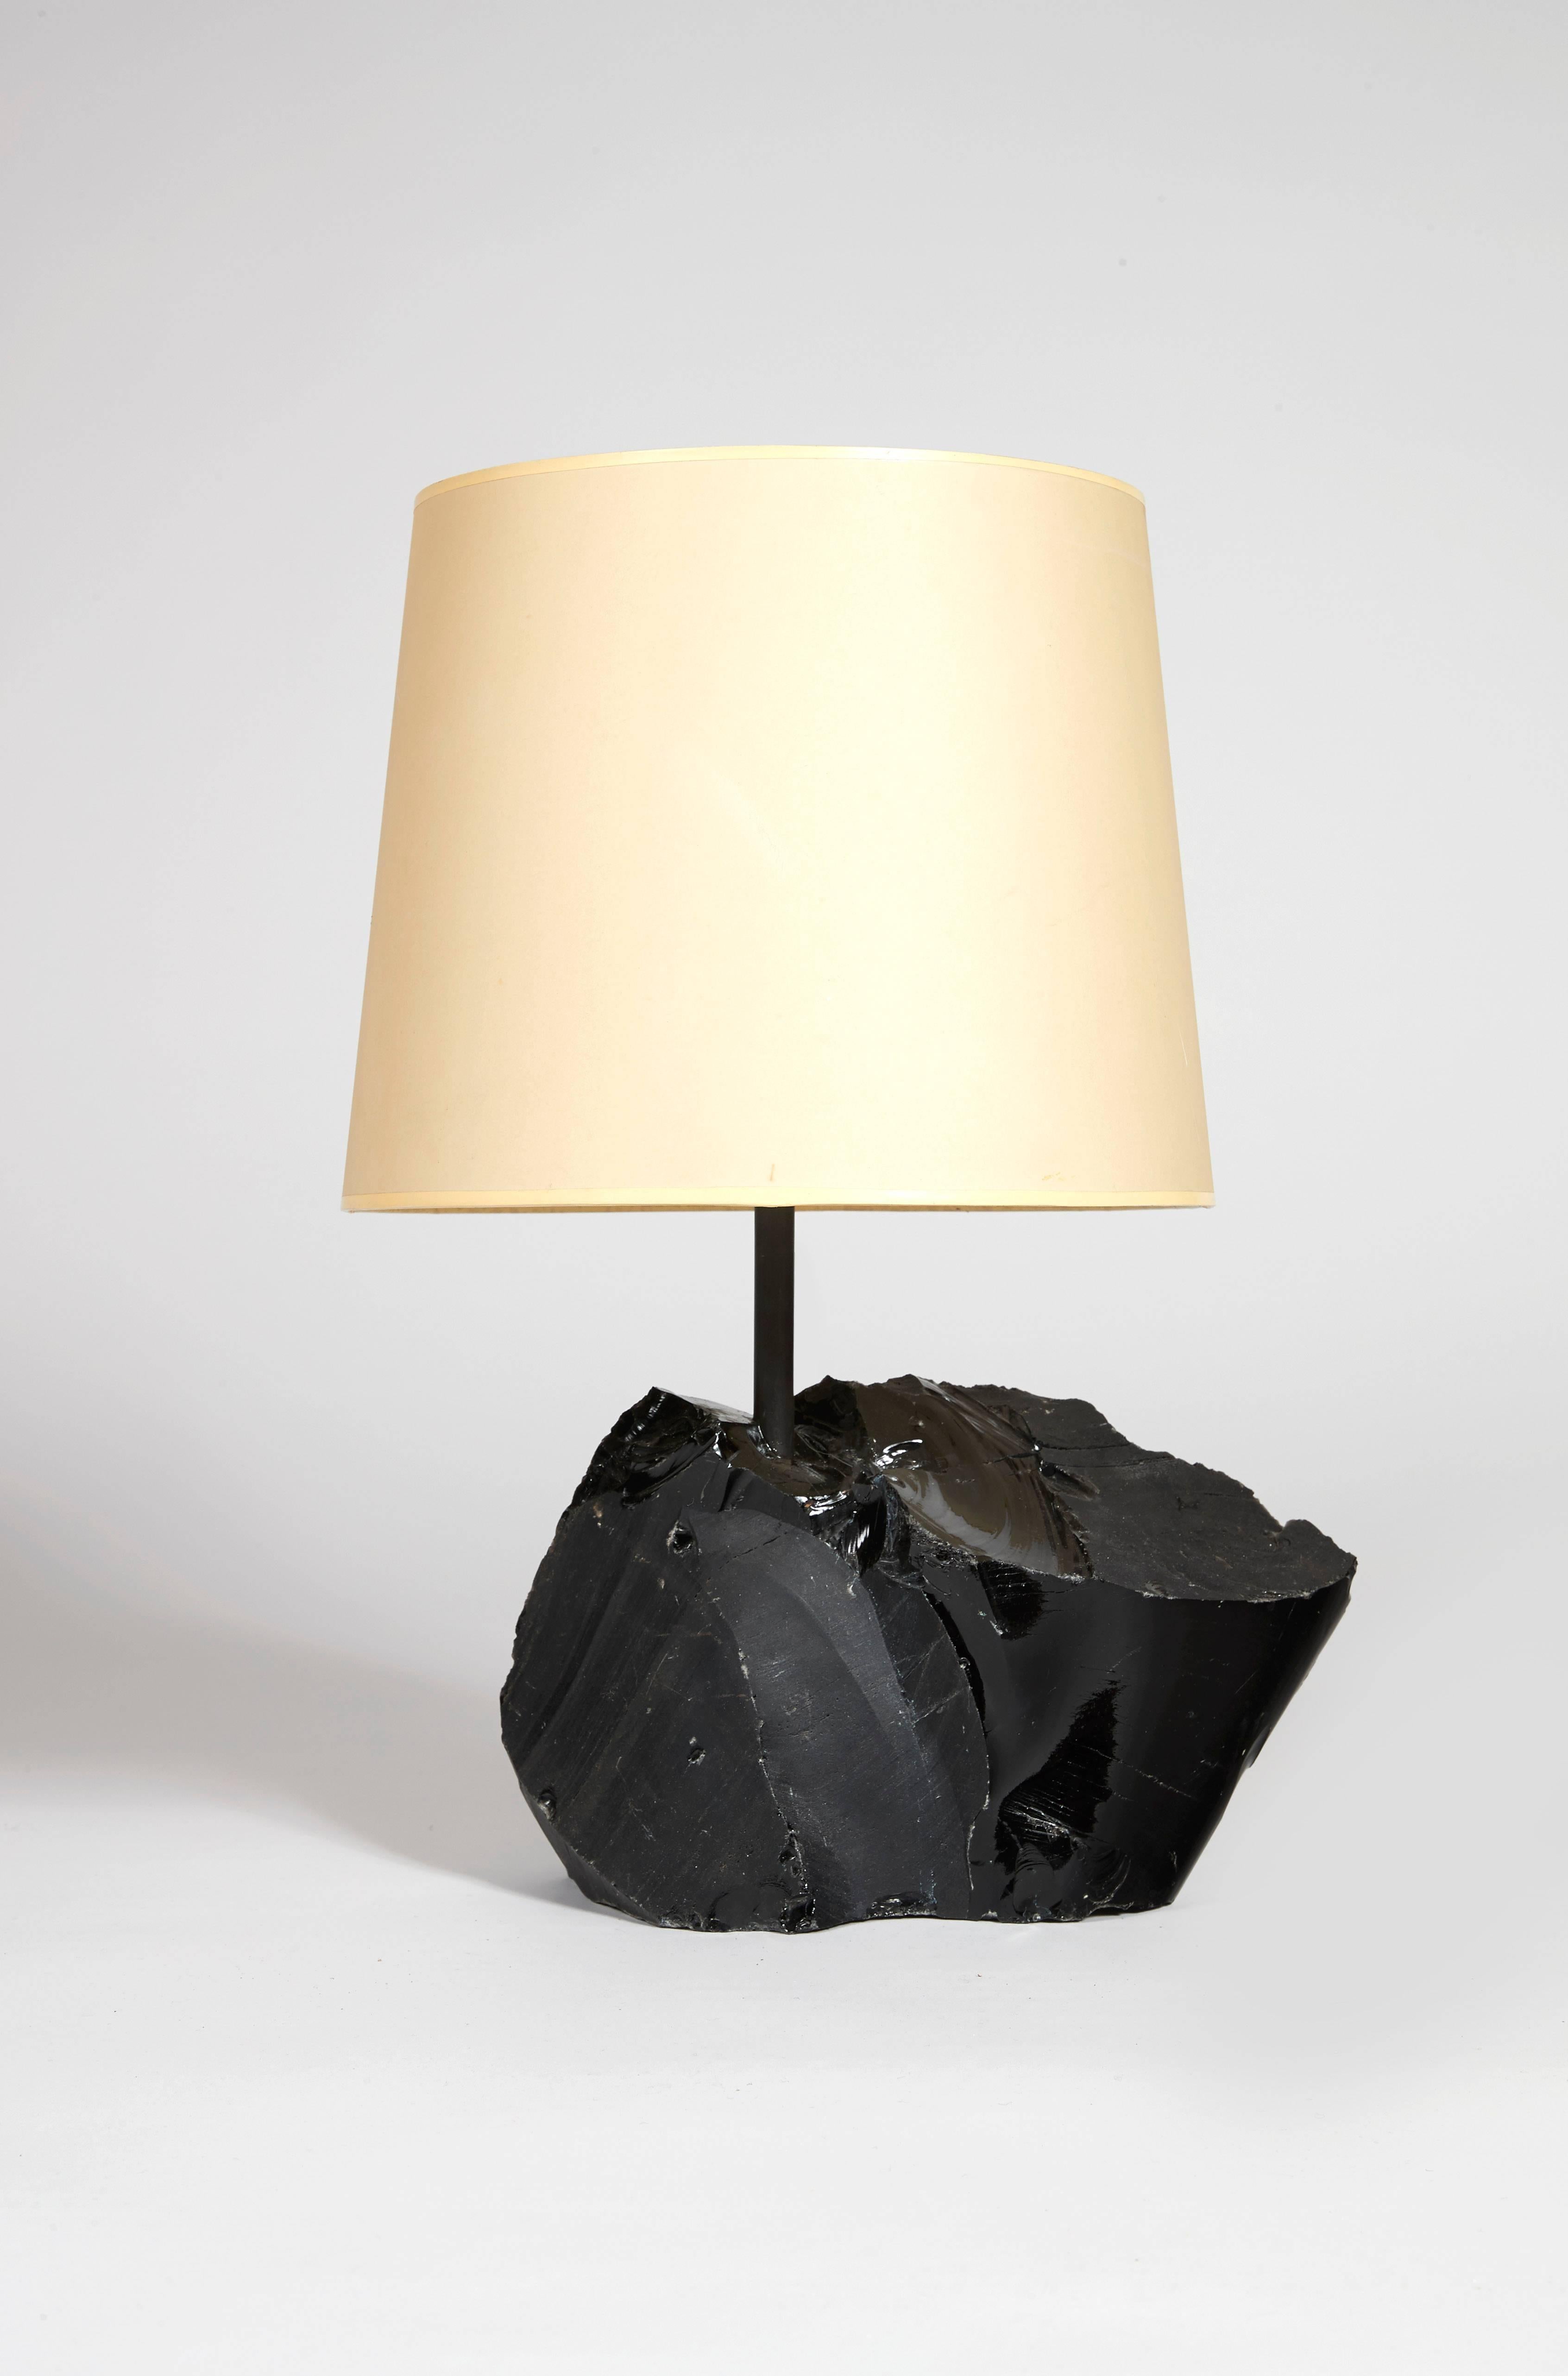 A black obsidian lamp base and black metal 
Not signed.

Note to international purchasers:

French electrification, Before using, our international clients will handle to install the electrical system by their local and professional electrician